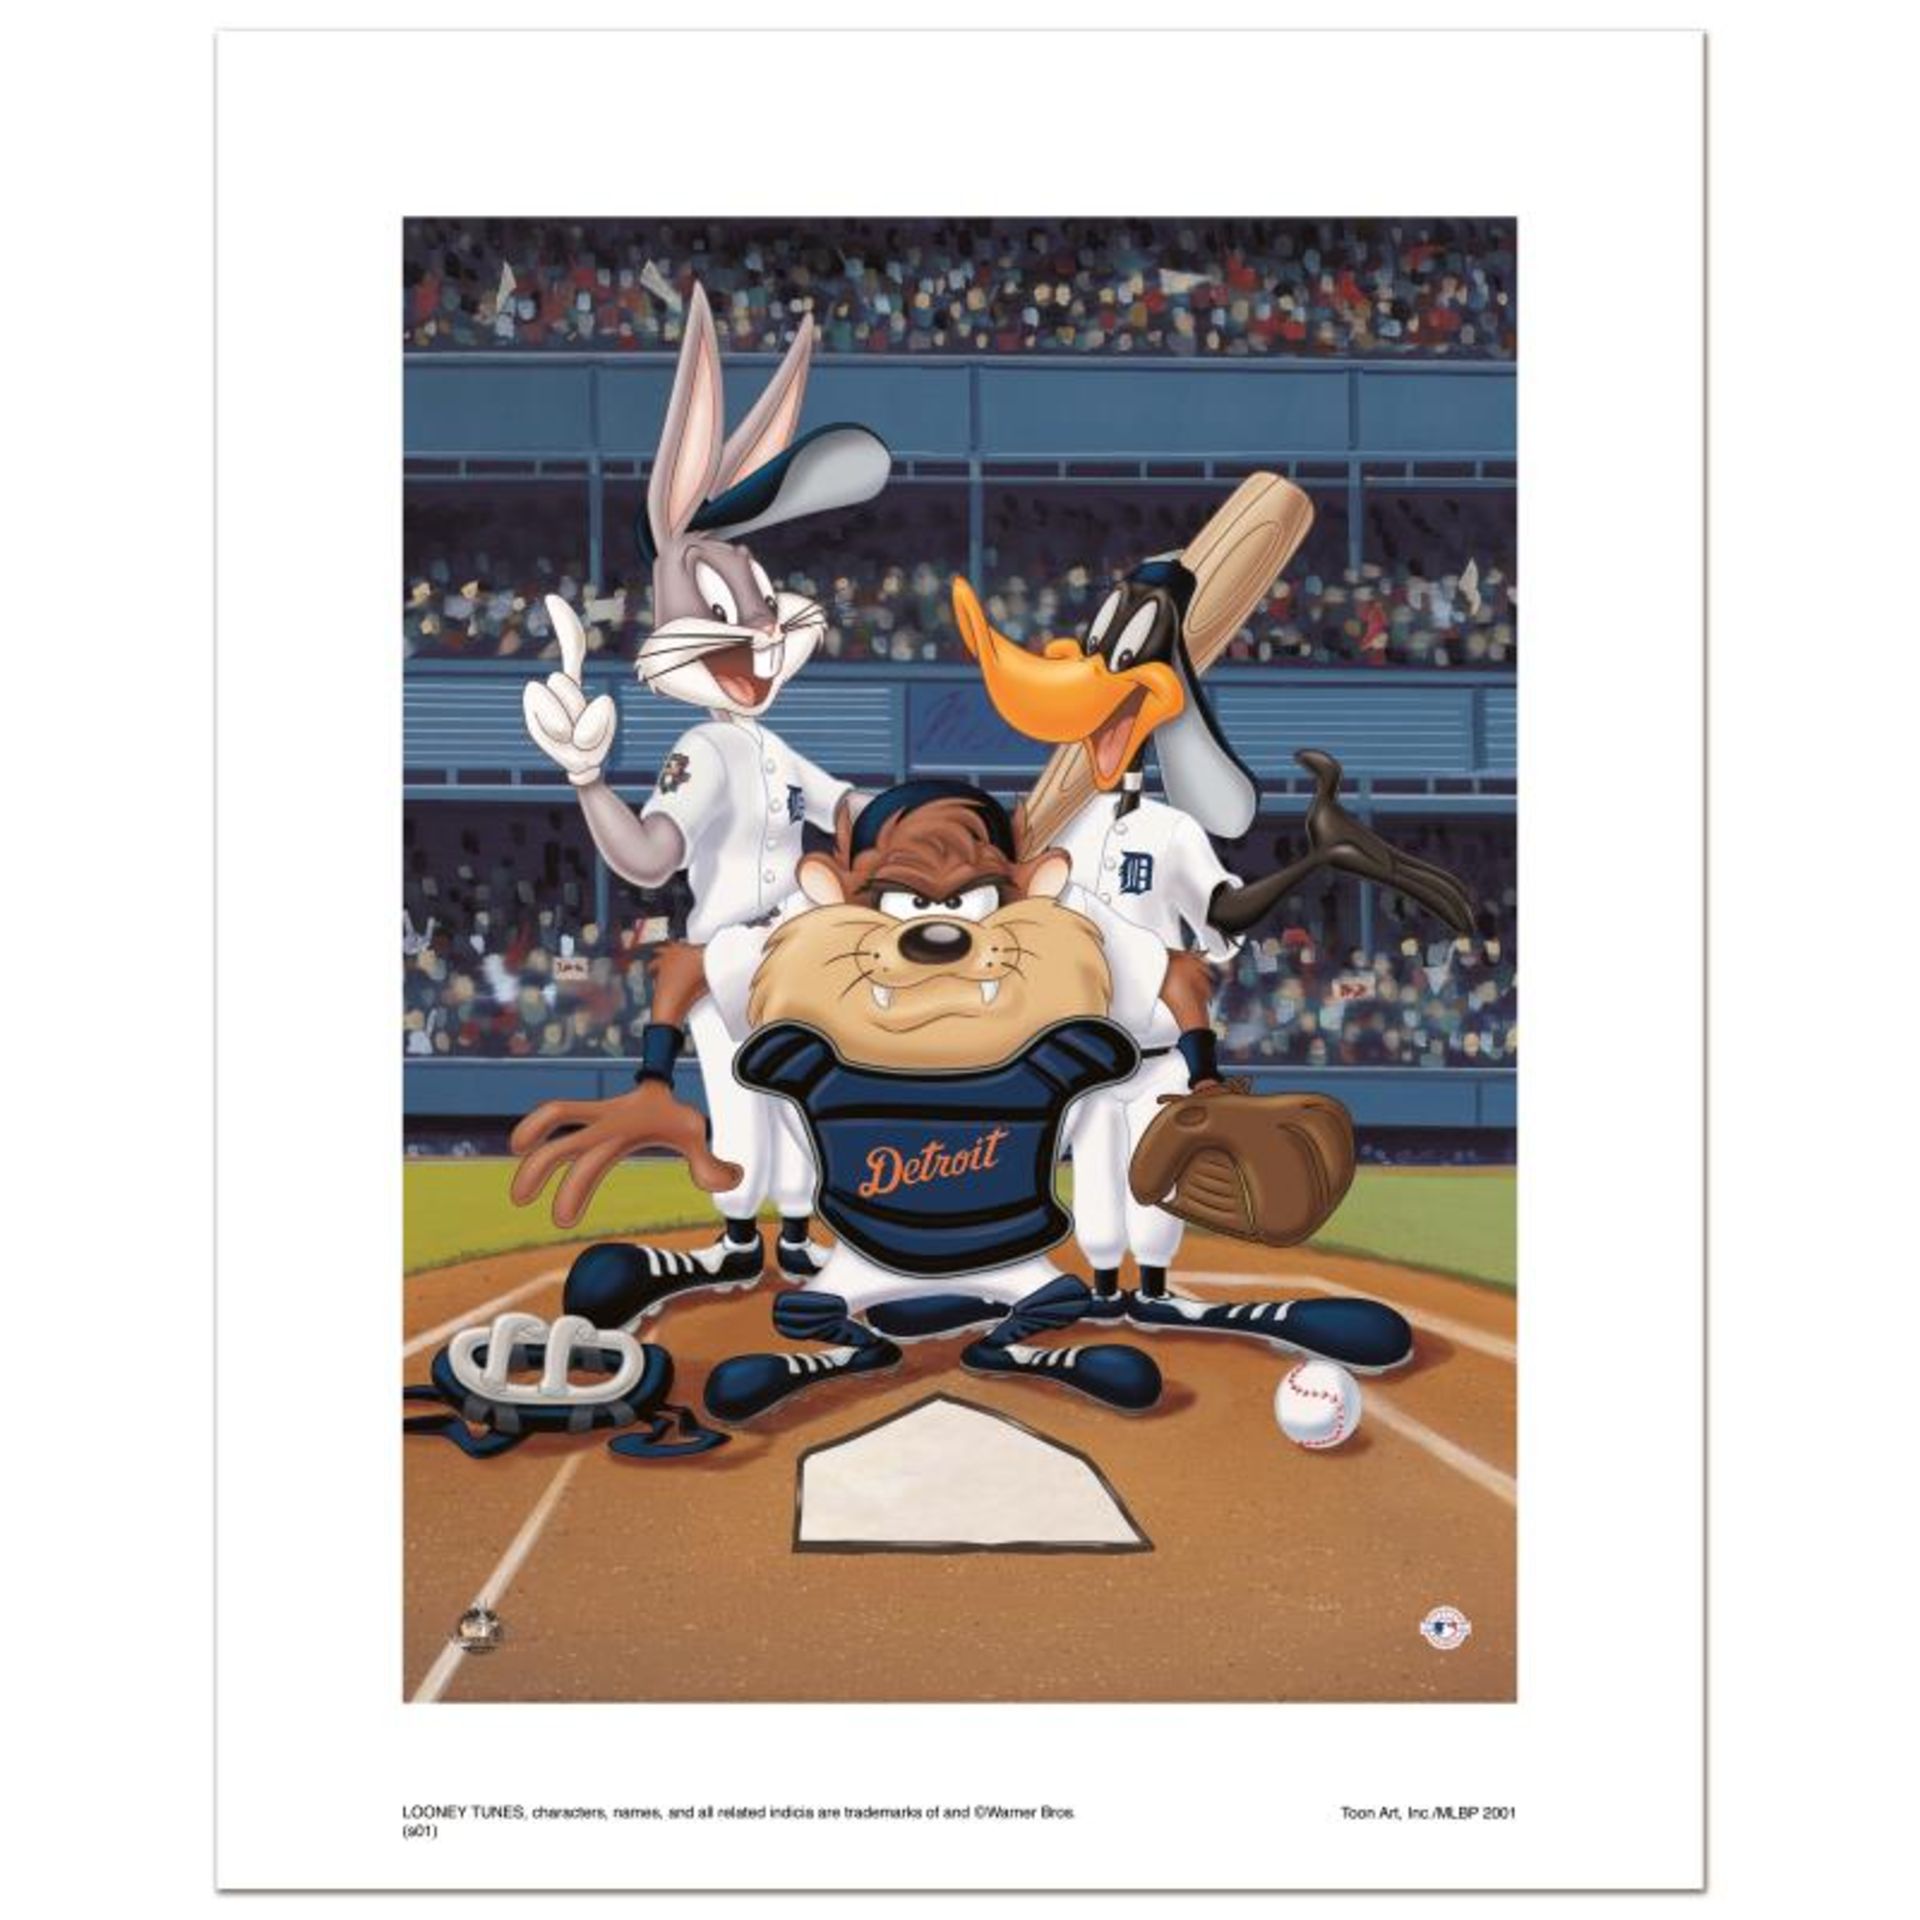 "At the Plate (Tigers)" Numbered Limited Edition Giclee from Warner Bros. with C